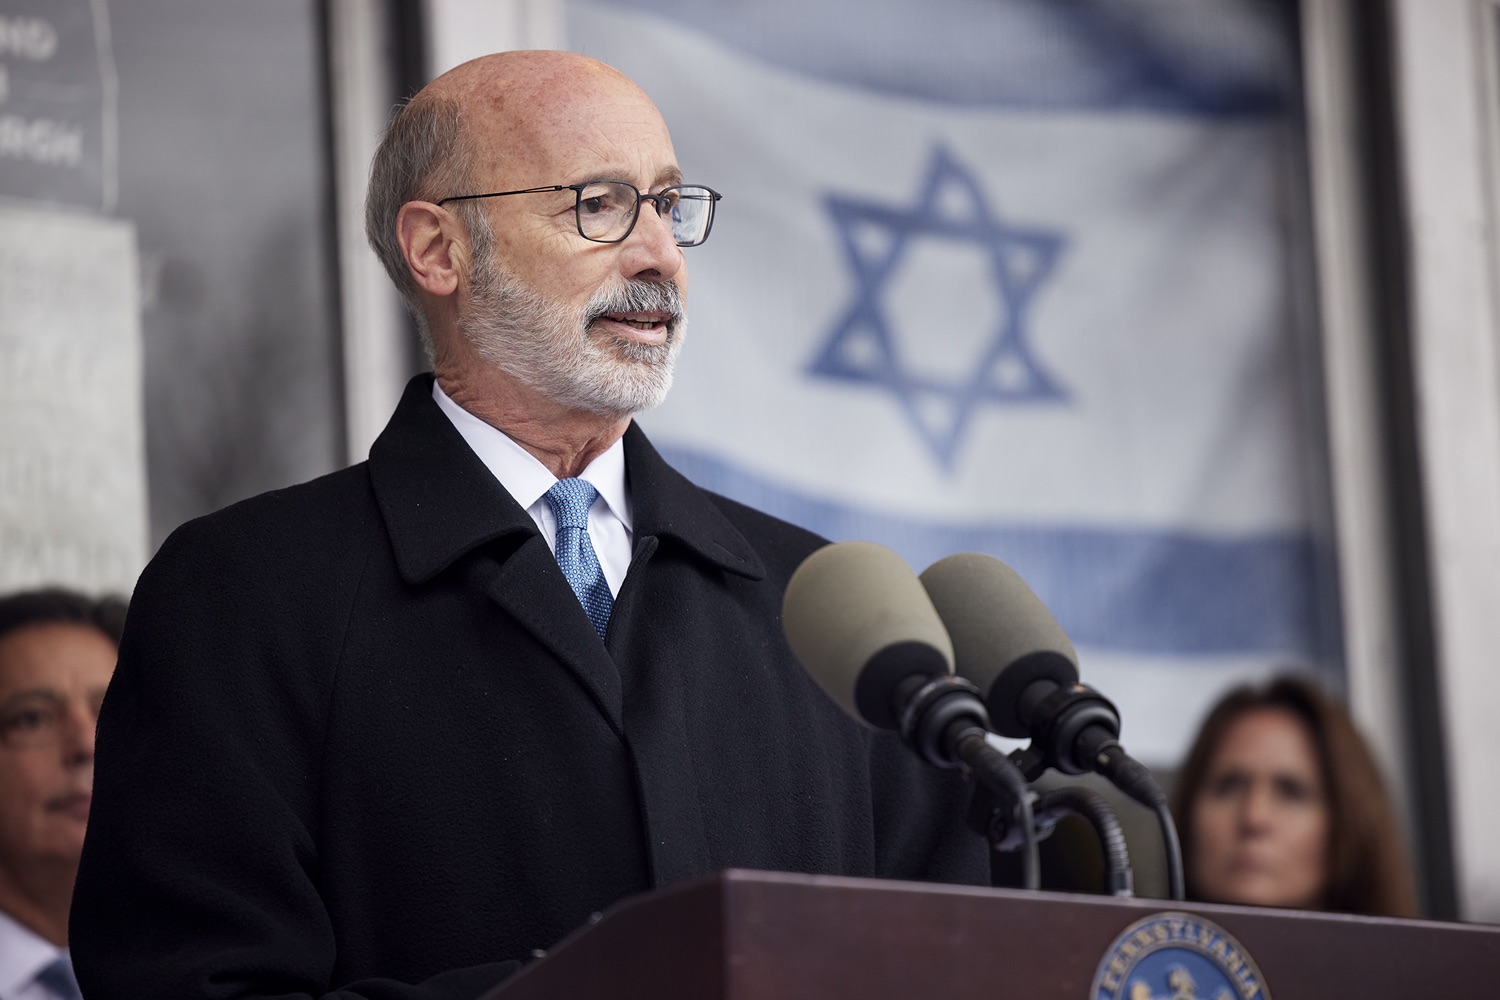 Pennsylvania Governor Tom Wolf speaking with the press.  Governor Tom Wolf visited the Tree of Life in Pittsburgh today to announce $6.6 million in state funding to support the rebuilding and reimagining of the synagogue. The governor was joined by Rabbi Jeffrey Myers, Senate Democratic Leader Jay Costa and members of the Tree of Lifes REMEMBER. REBUILD. RENEW campaign which will transform the site of the worst antisemitic attack in U.S. history into a new place of hope, remembrance, and education. Pittsburgh, PA - December 6, 2021<br><a href="https://filesource.amperwave.net/commonwealthofpa/photo/20308_gov_treeOfLife_dz_014_copy.jpg" target="_blank">⇣ Download Photo</a>